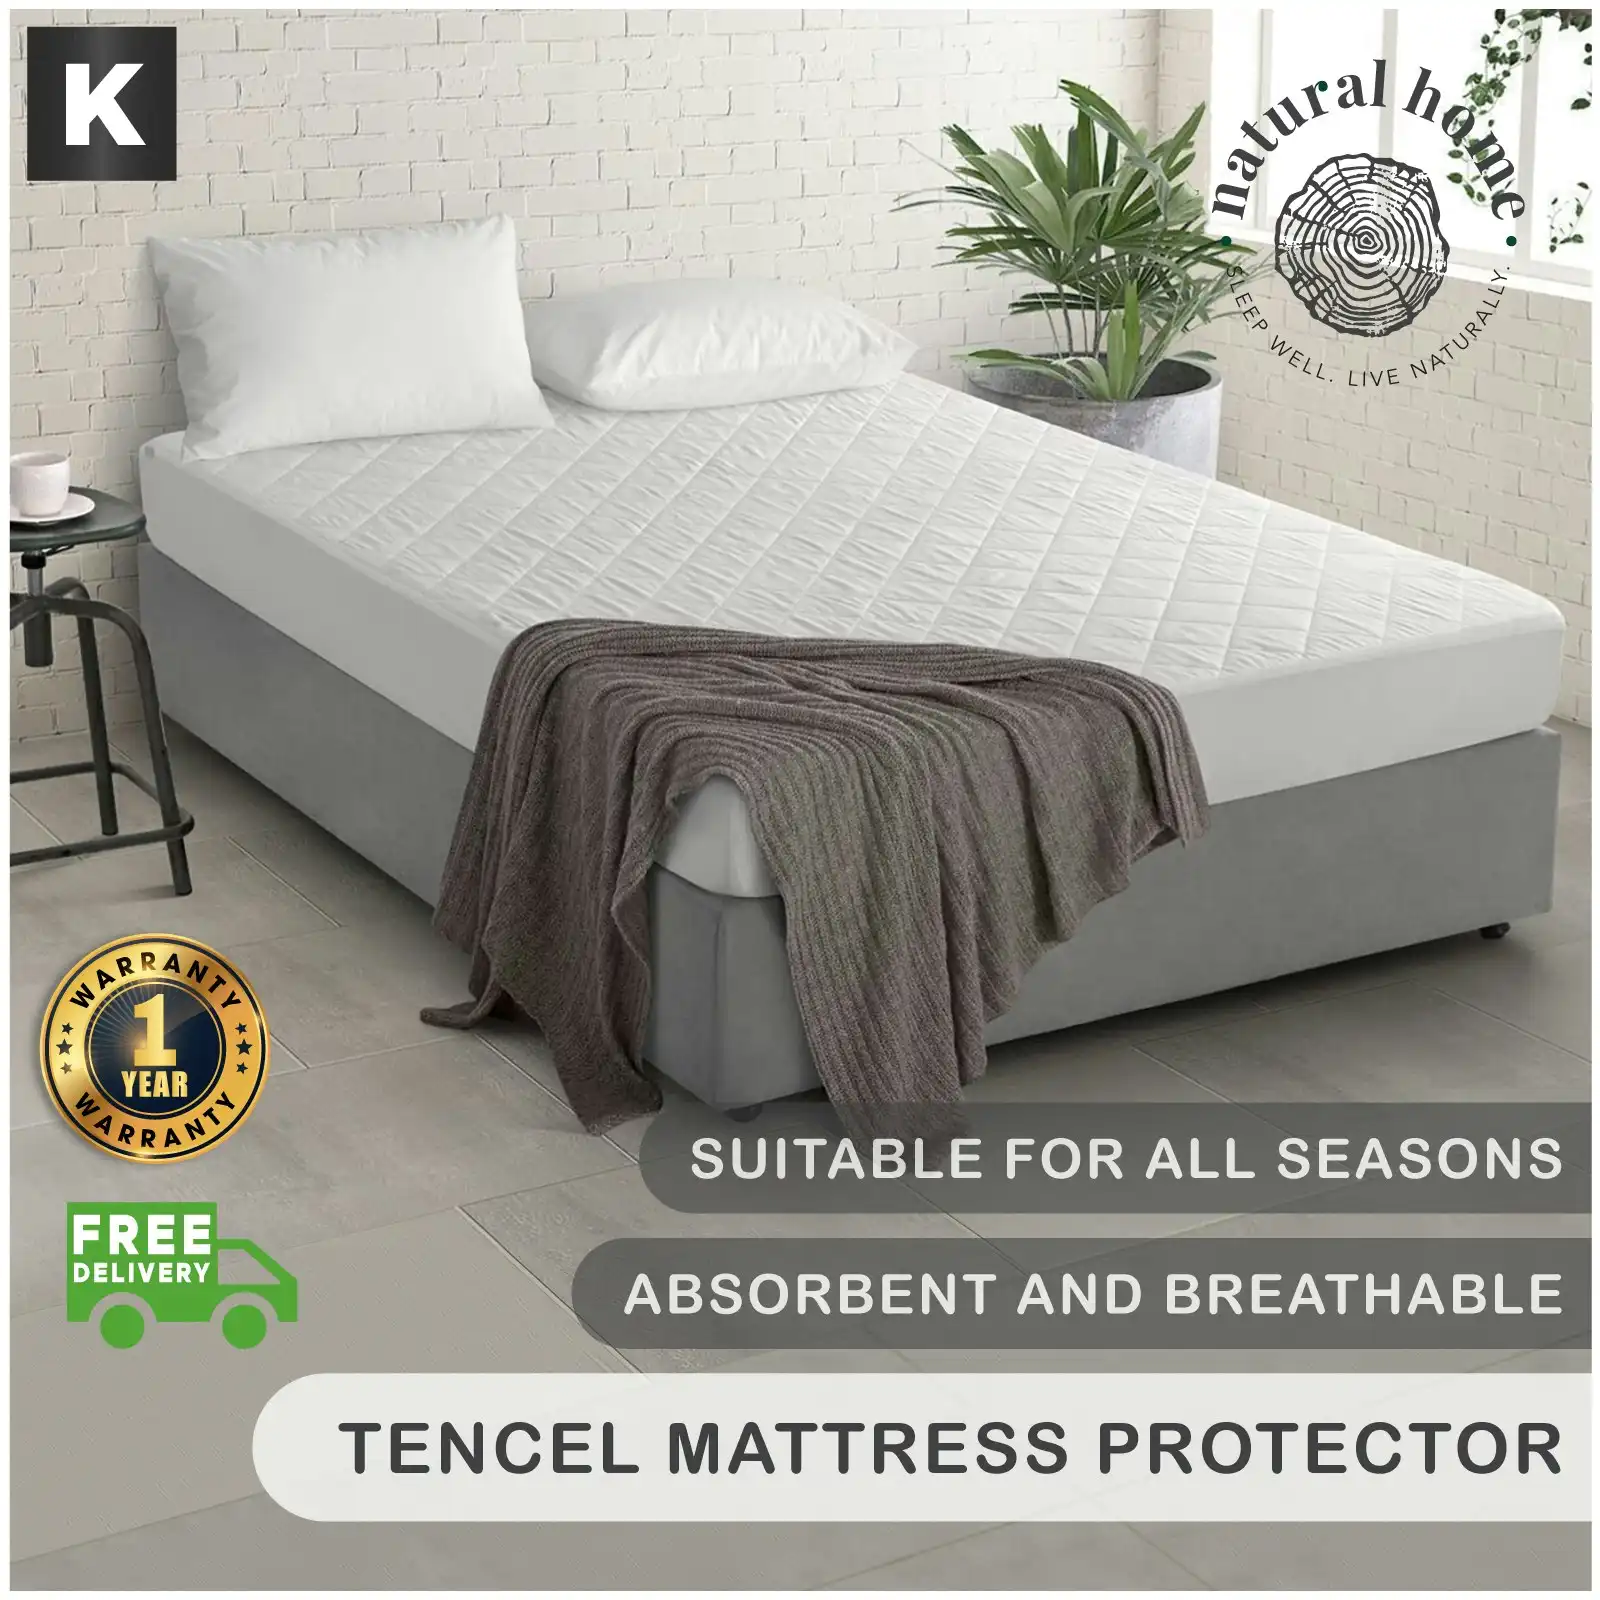 Natural Home Tencel Mattress Protector King Bed - White - King Bed